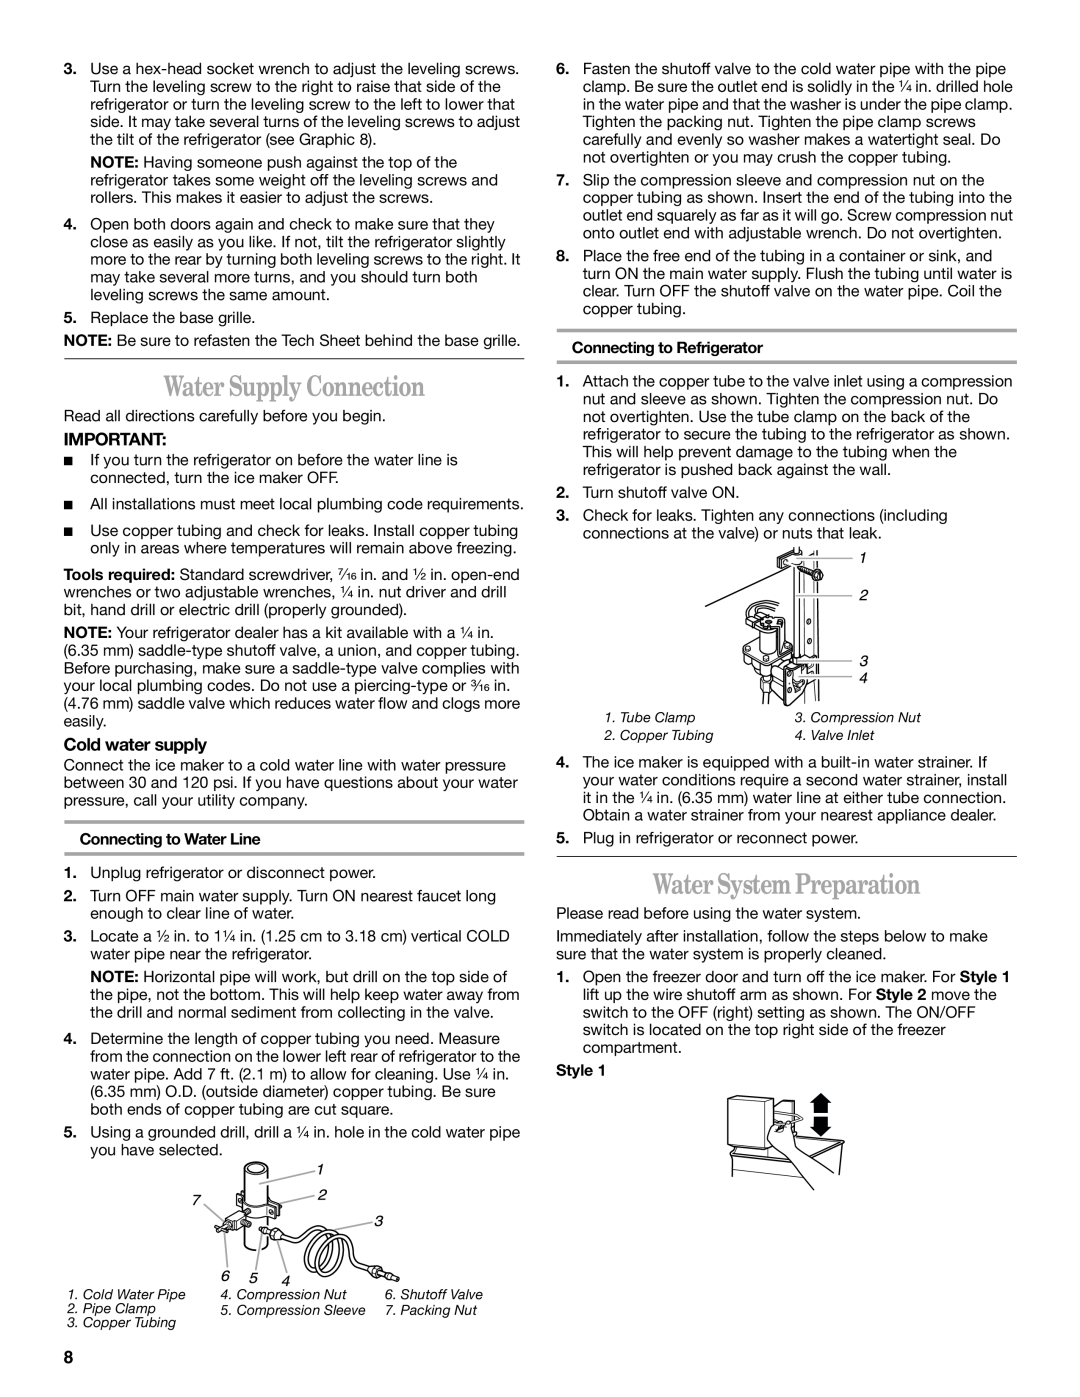 Whirlpool ED2NTGXLQ02 manual Water Supply Connection, Water System Preparation, Cold water supply, Connecting to Water Line 